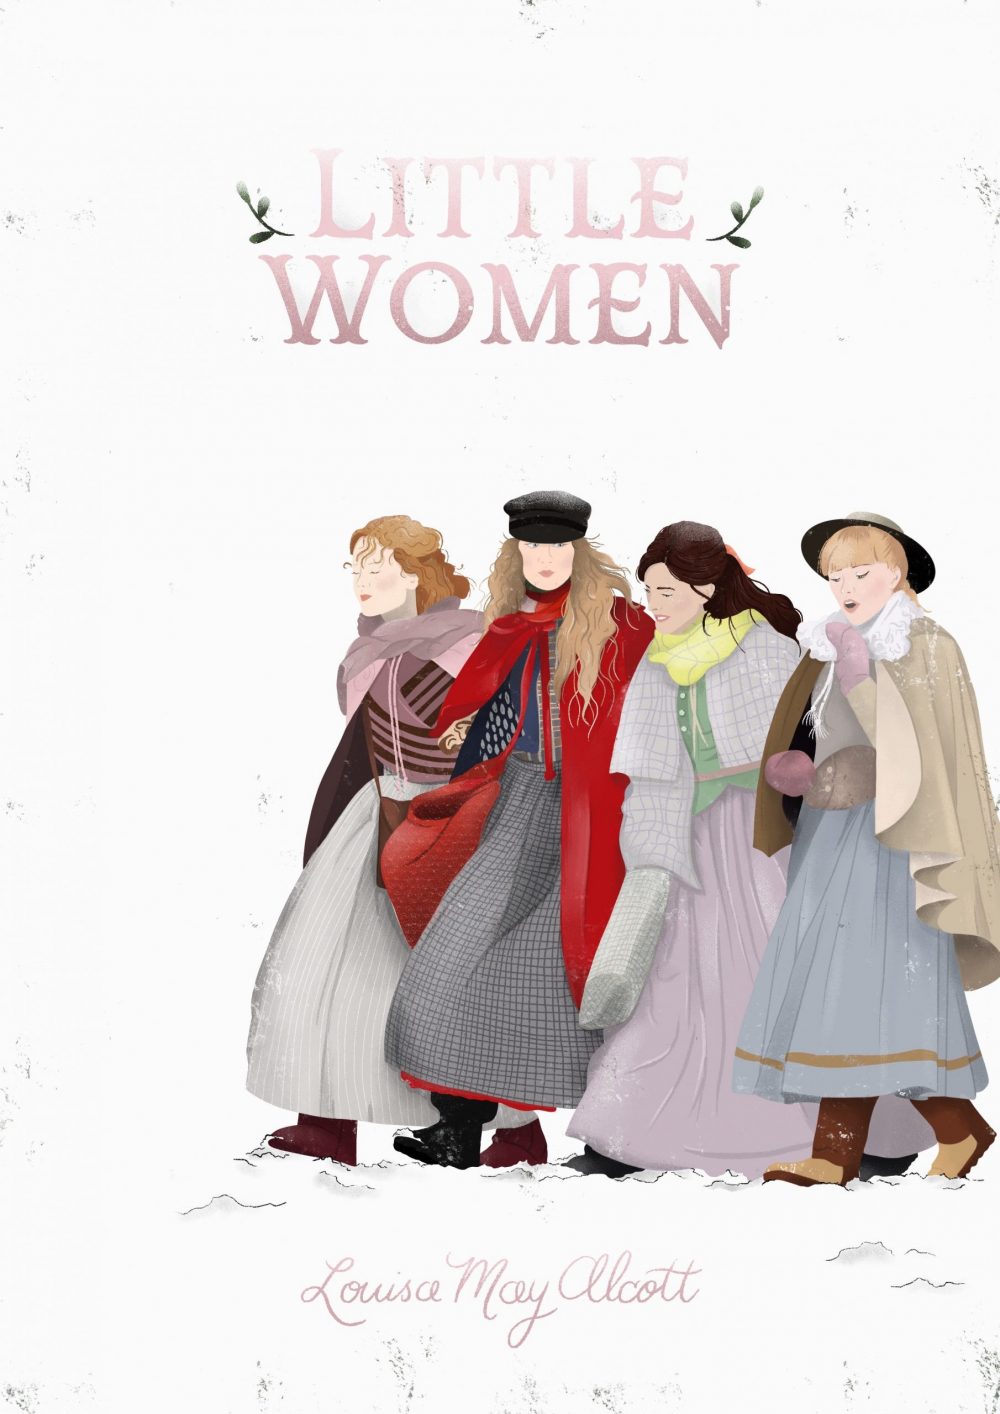 Teach your girls the virtues that are the most beautiful and satisfy your what is Little Women about questions with this review complete with character descriptions and virtue highlights.